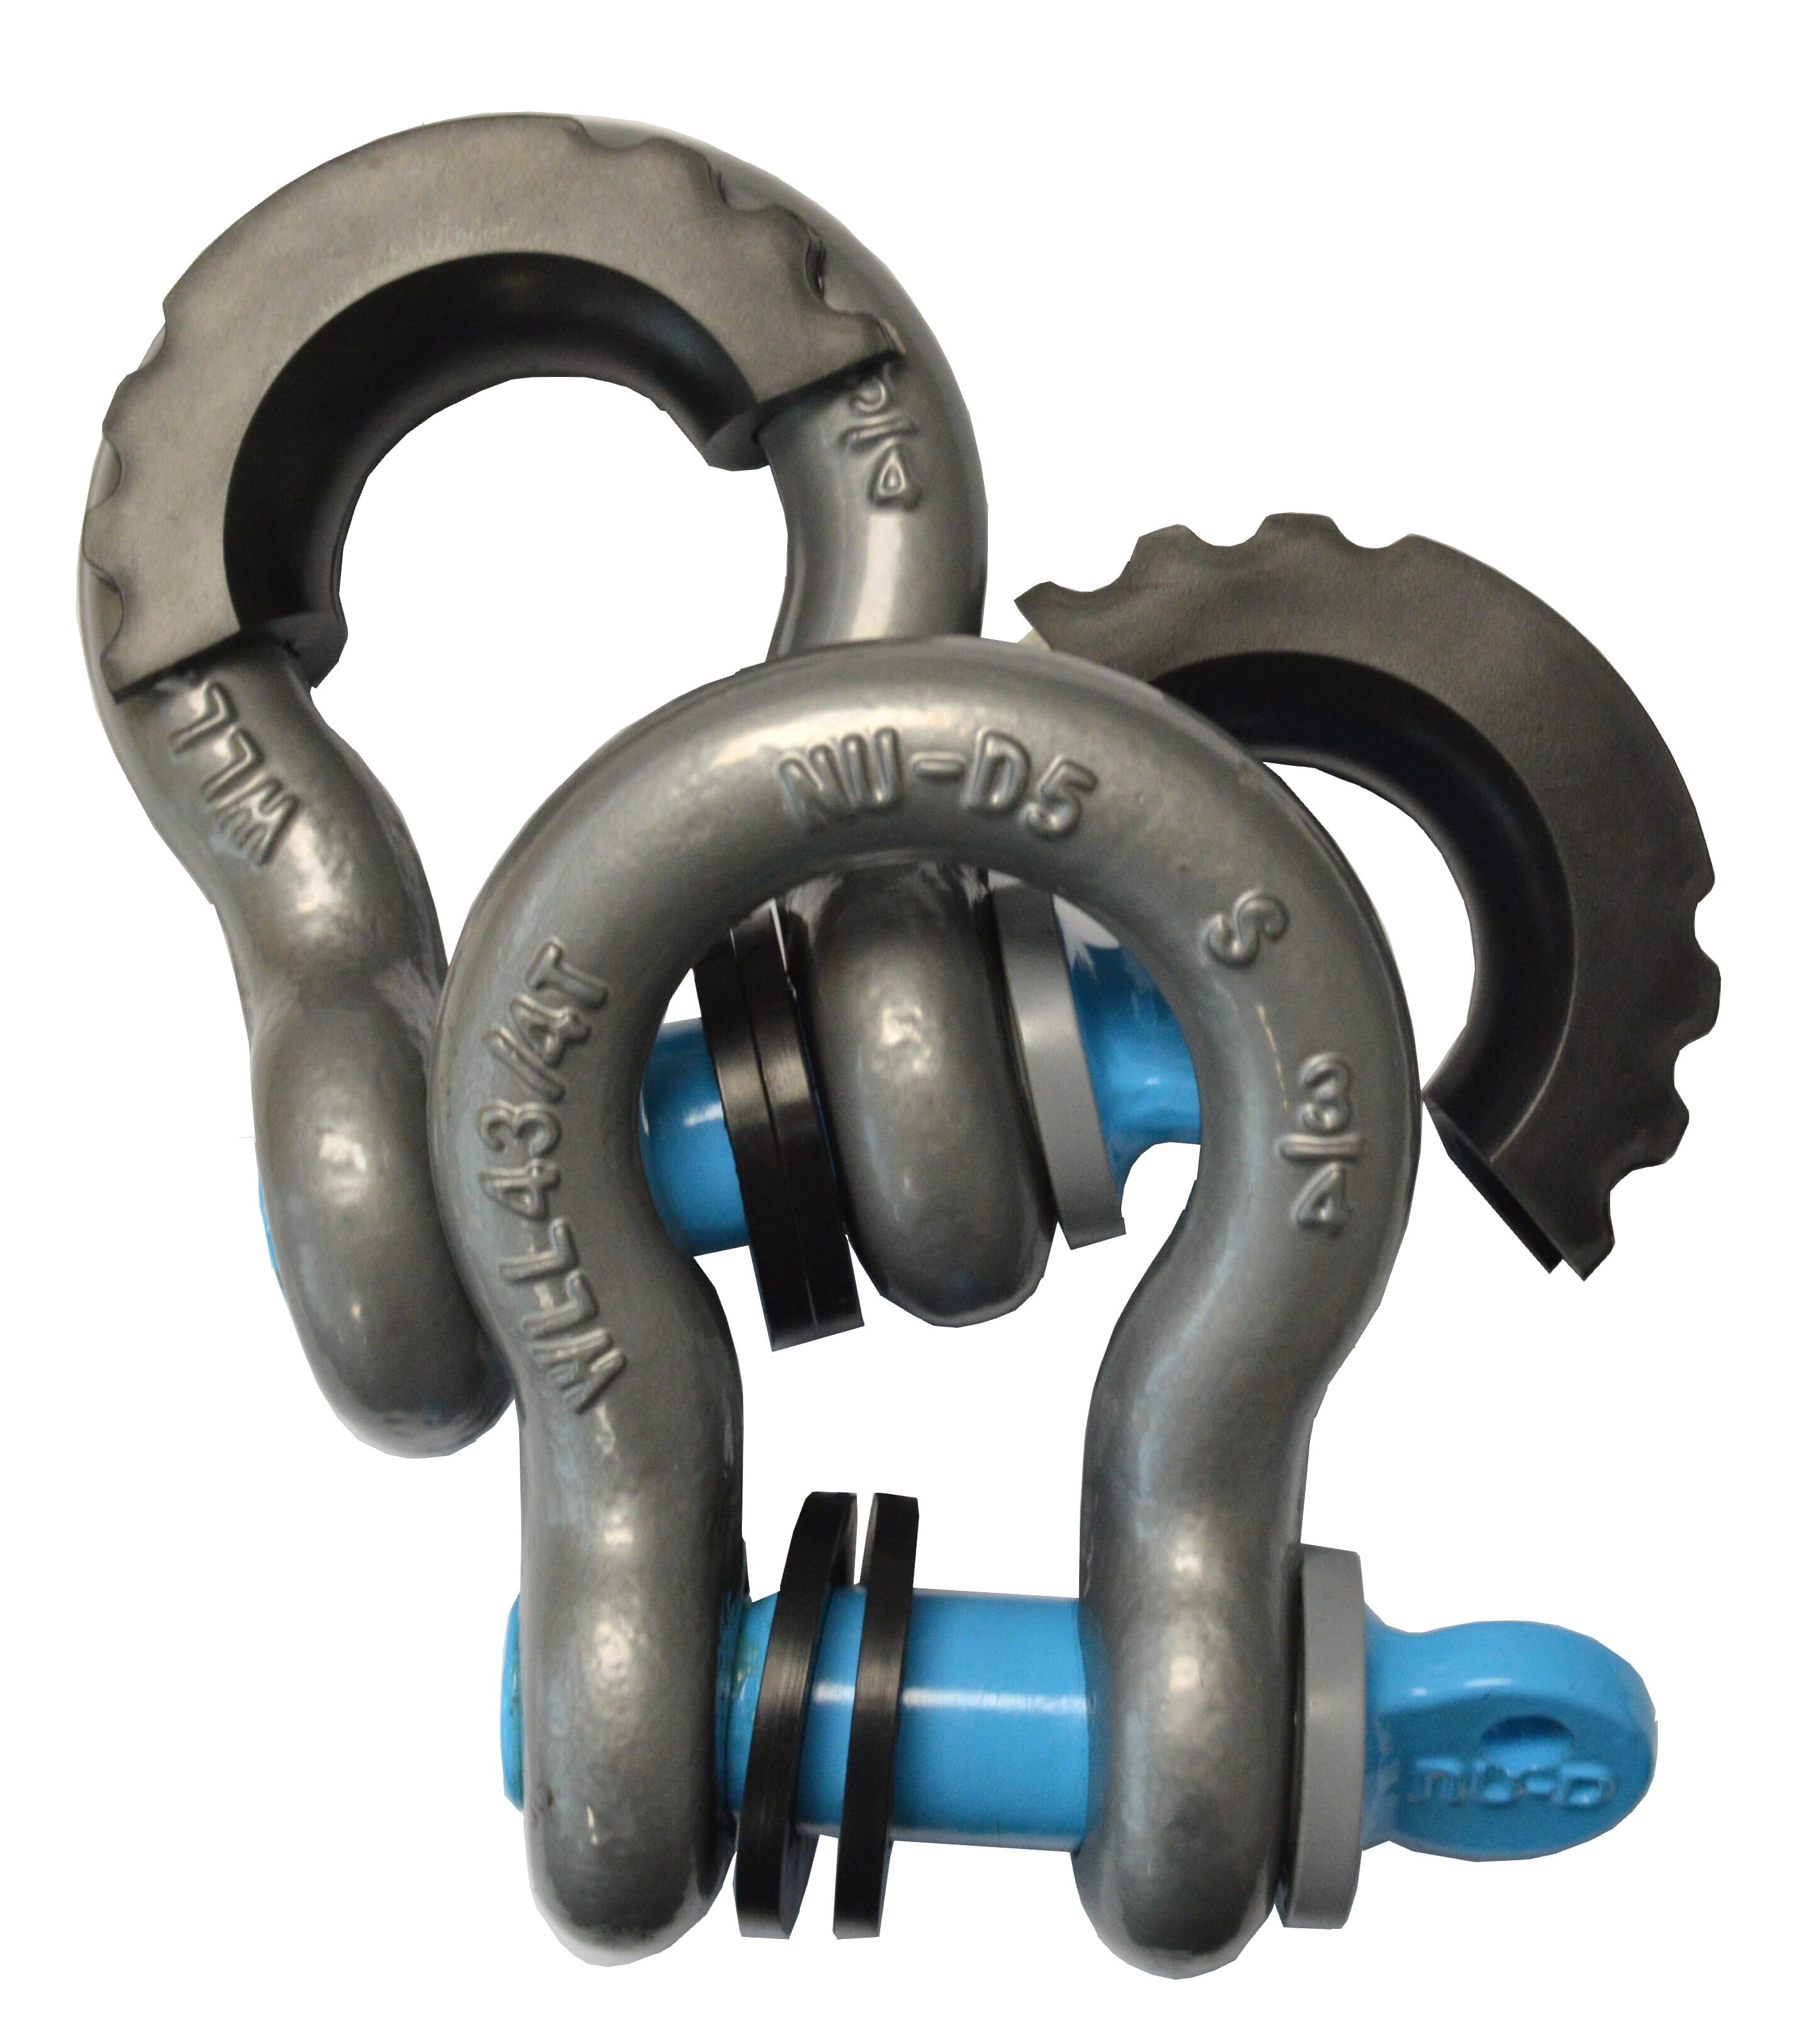 .NU-D Bow Shackles Easy Tighten/Loosen Galvanised. 4 x 4 Recovery Kit. 2 pce pack Tested WLL 4750Kg 19mm